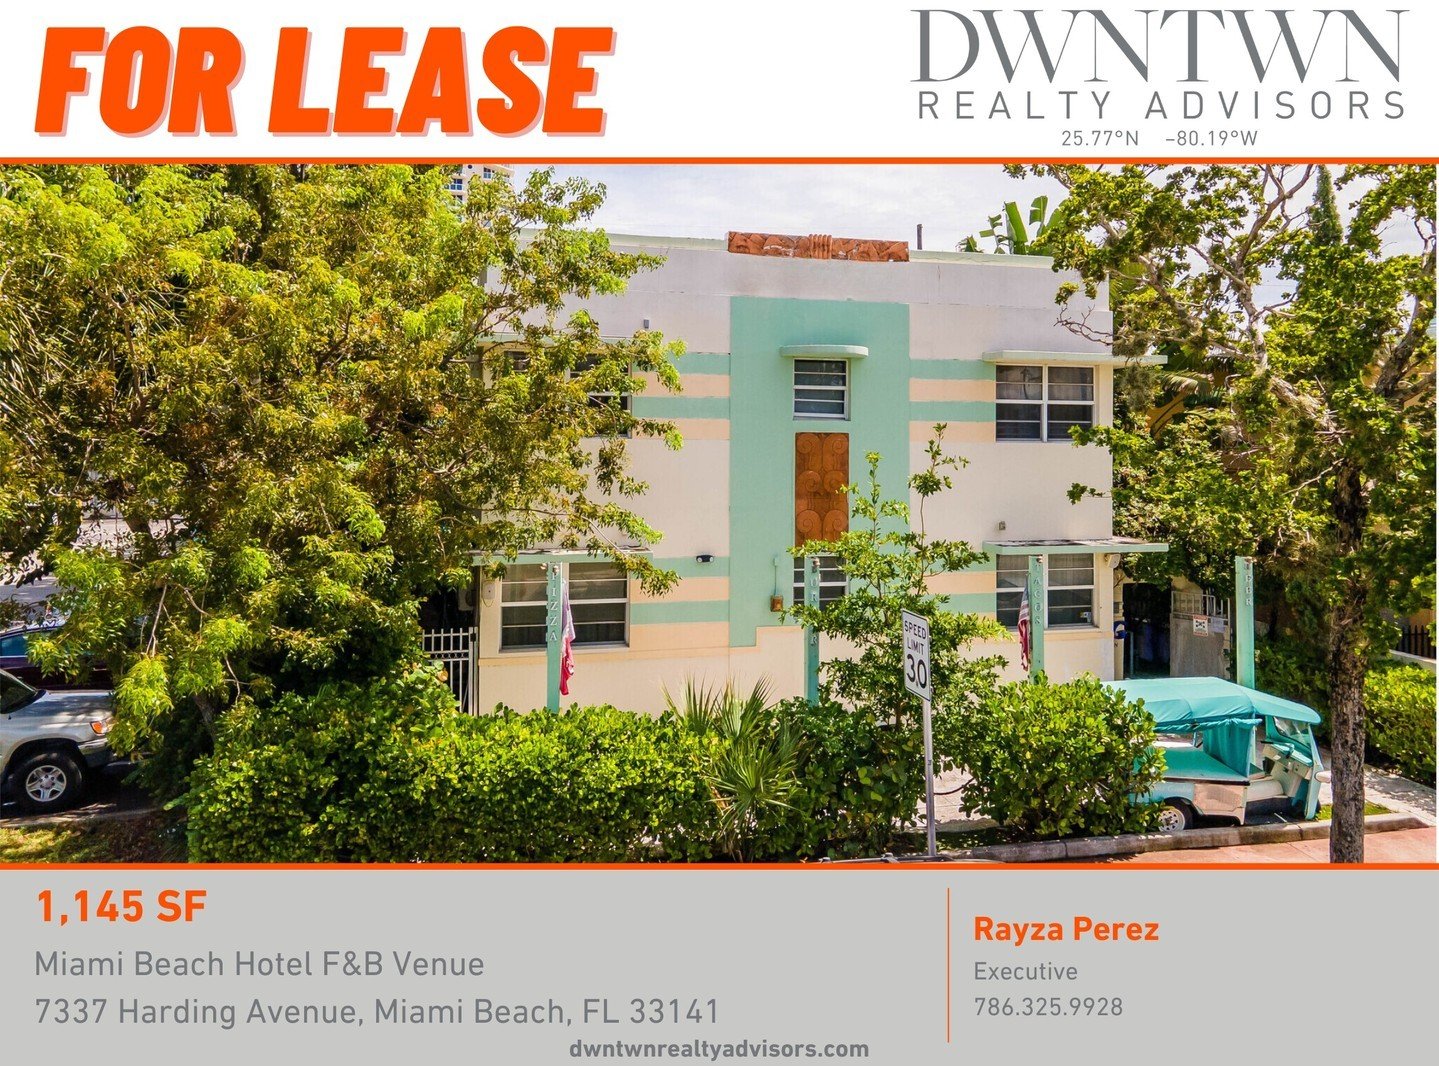 JUST LISTED FOR LEASE | 1,145 SF | Miami Beach Hotel F&amp;B Venue

DWNTWN Realty Advisors has been retained exclusively to arrange the leasing of the F&amp;B space located at 7337 Harding Avenue. Constructed in 1937, the property is a 10-room, two-s